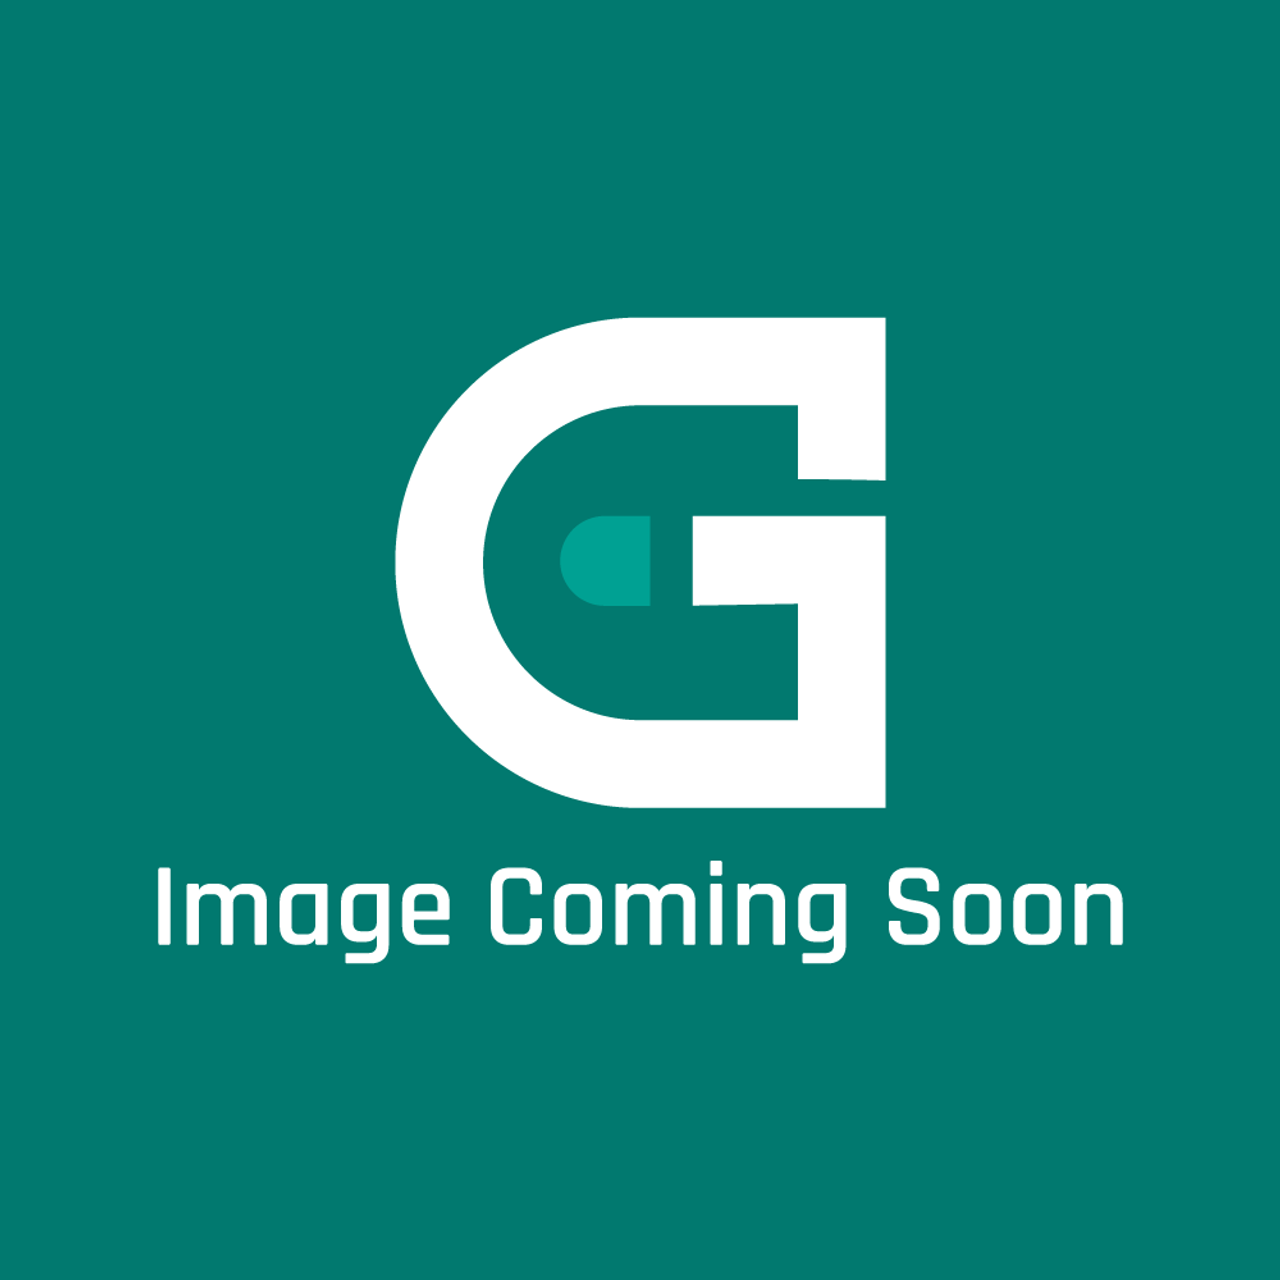 Frigidaire - Electrolux 5304490500 Panel - Image Coming Soon!